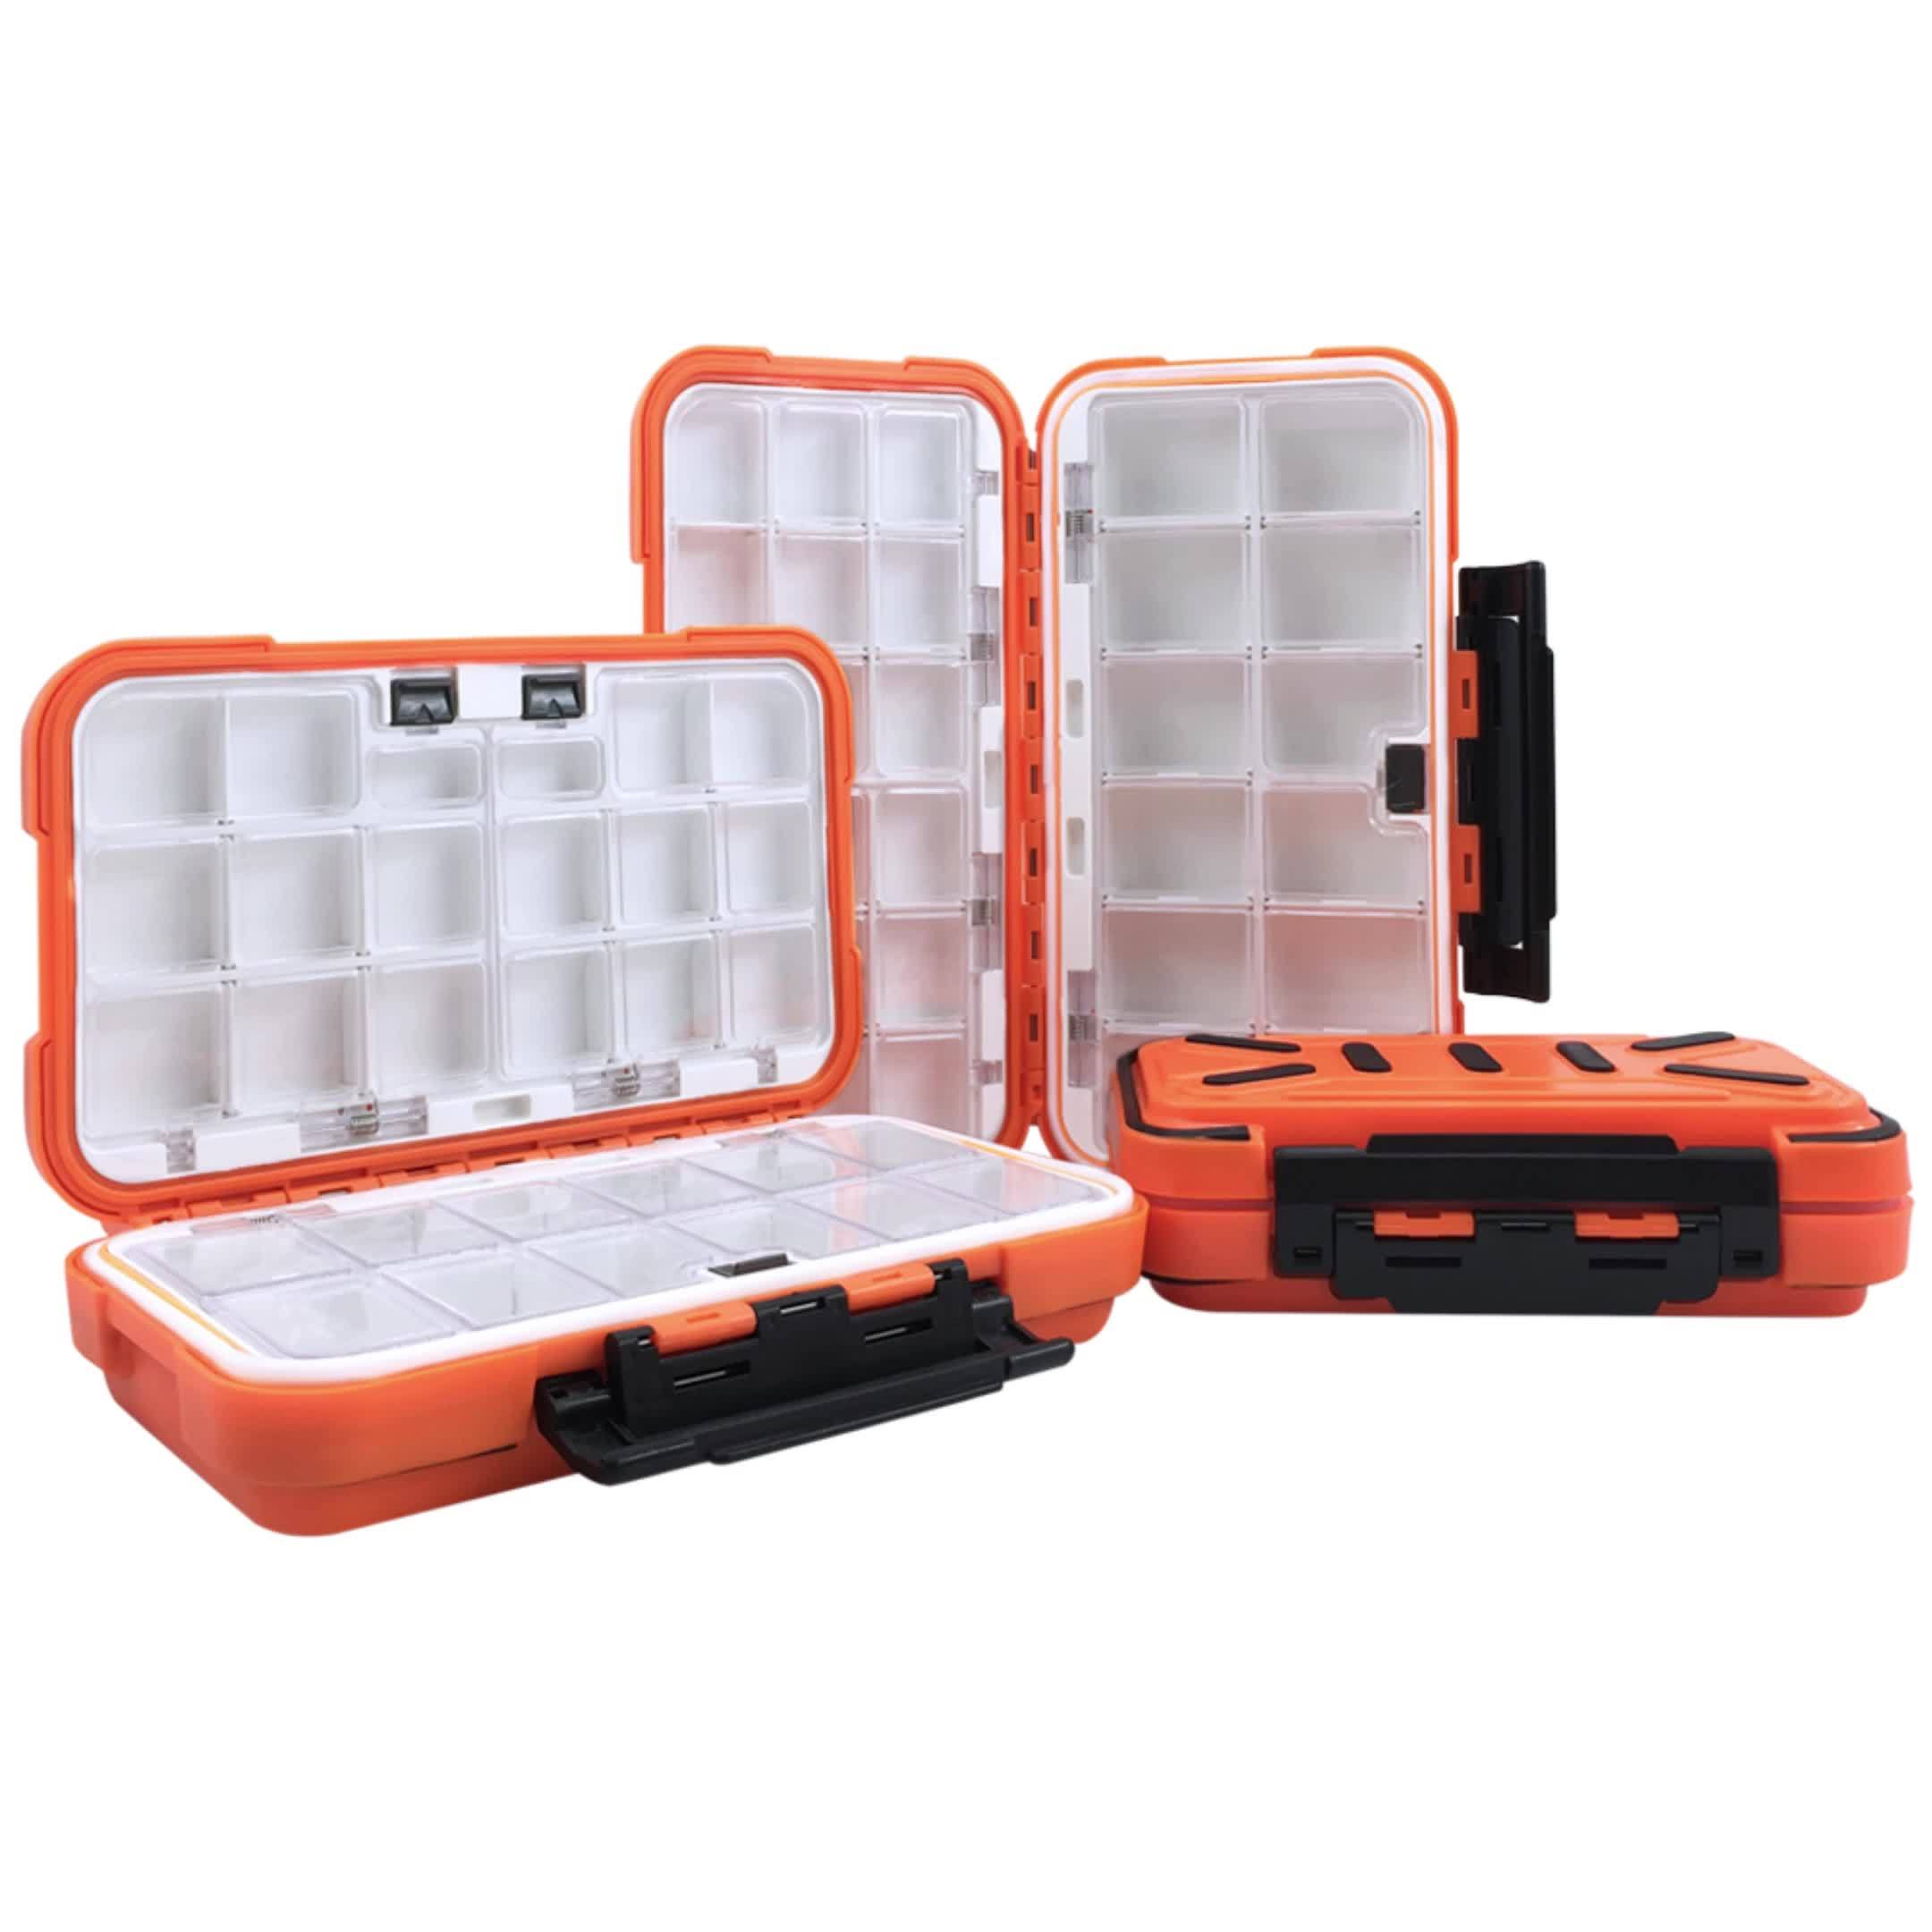 Double-Sided Waterproof Fishing Tackle Box, Fish Hook Fishing Lure Bait  Storage Case, Mini Portable Fishing Gear Accessories Box